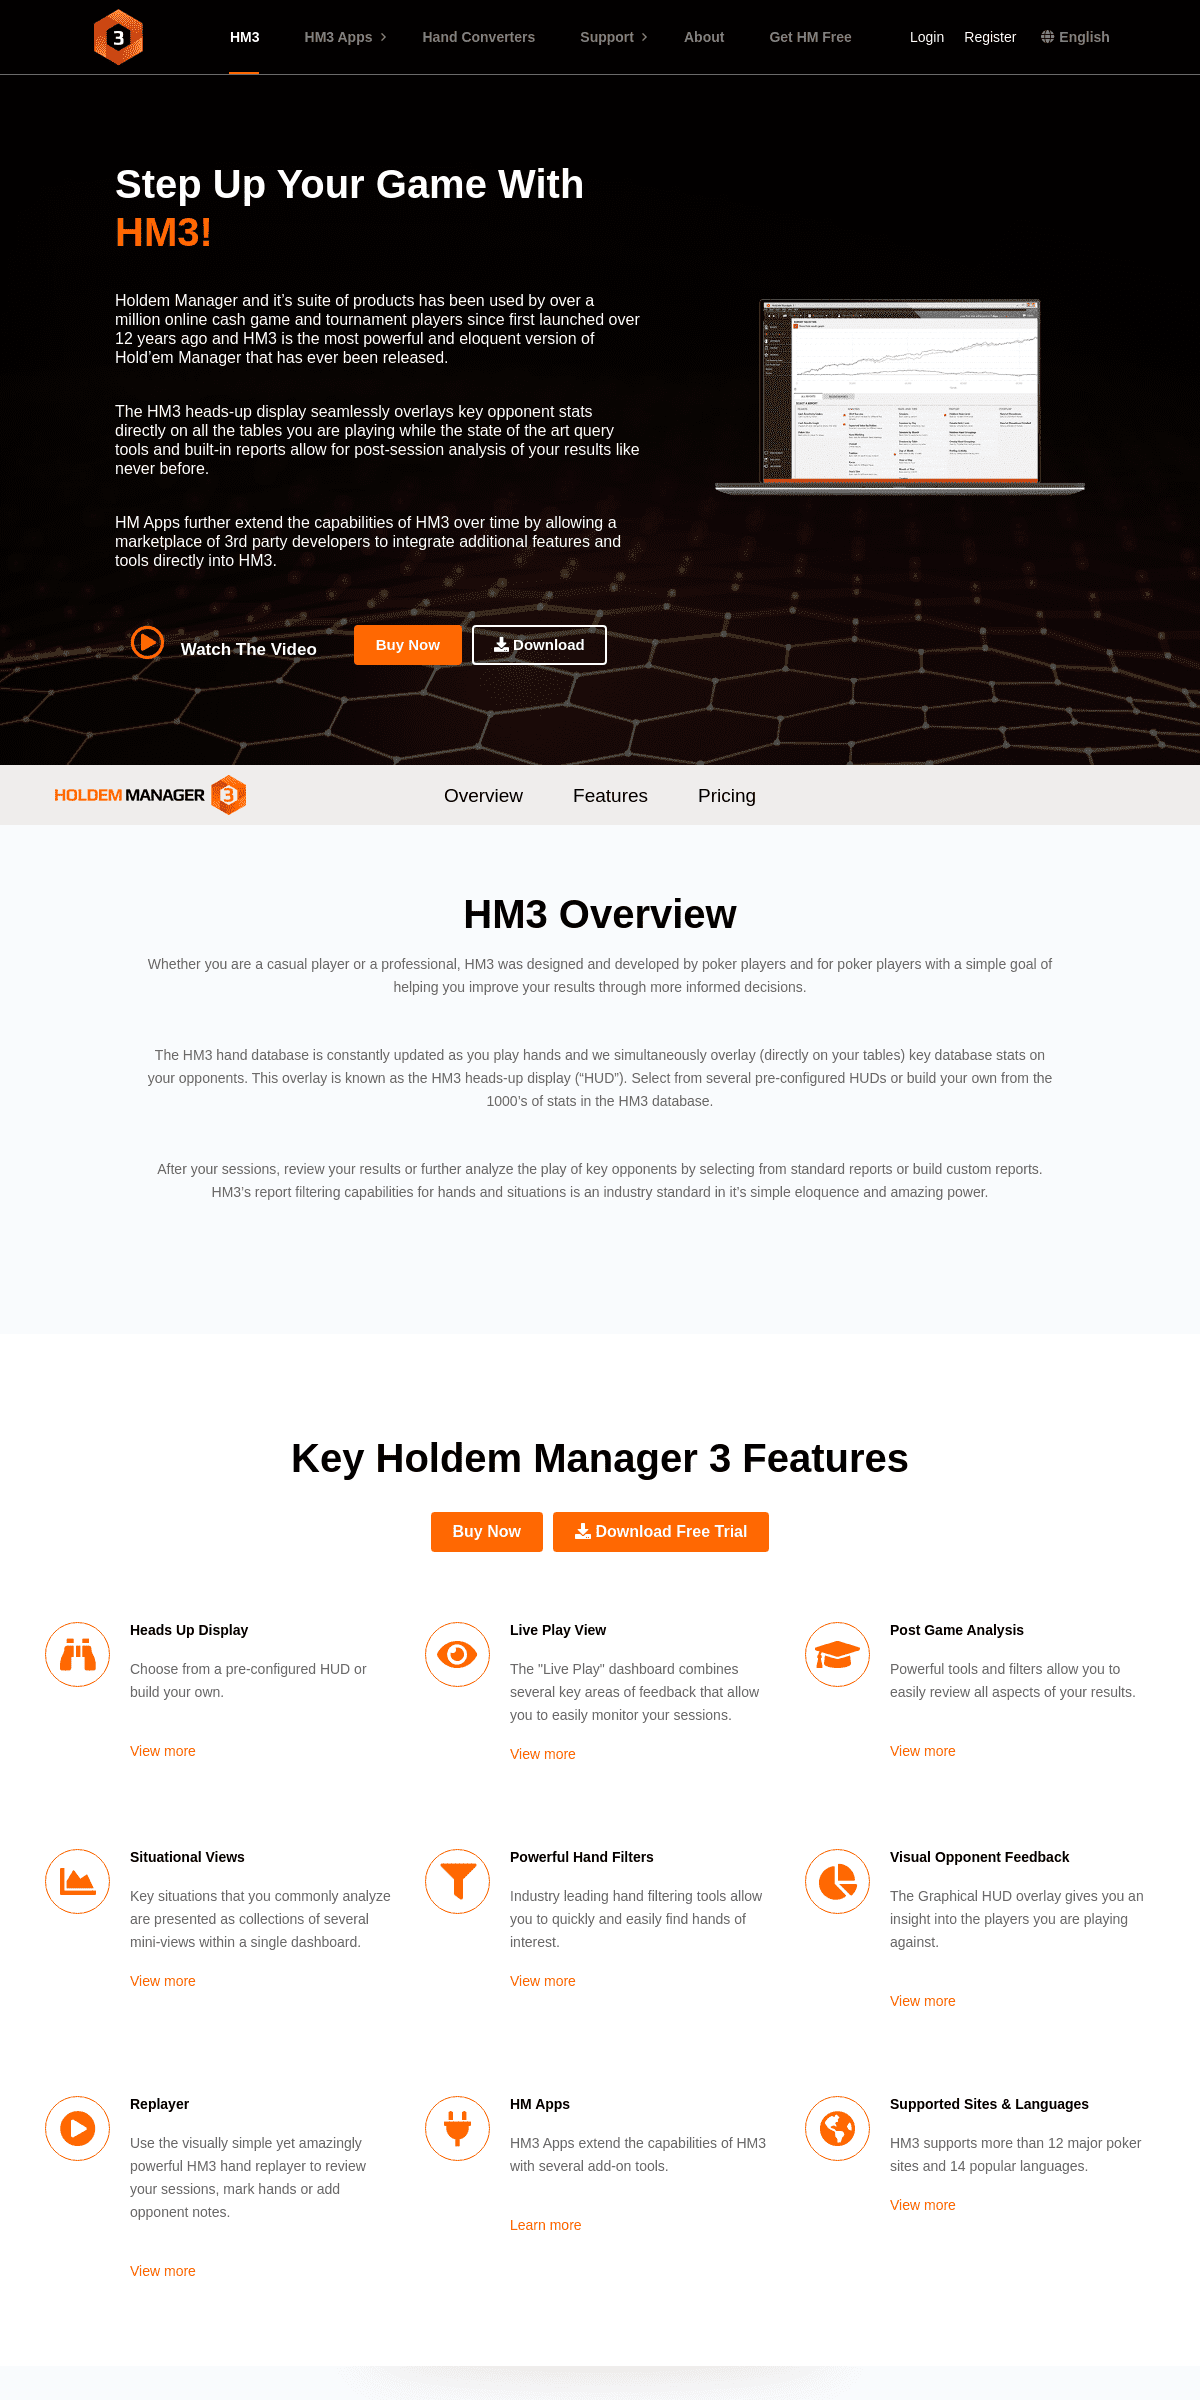 A complete backup of holdemmanager.com